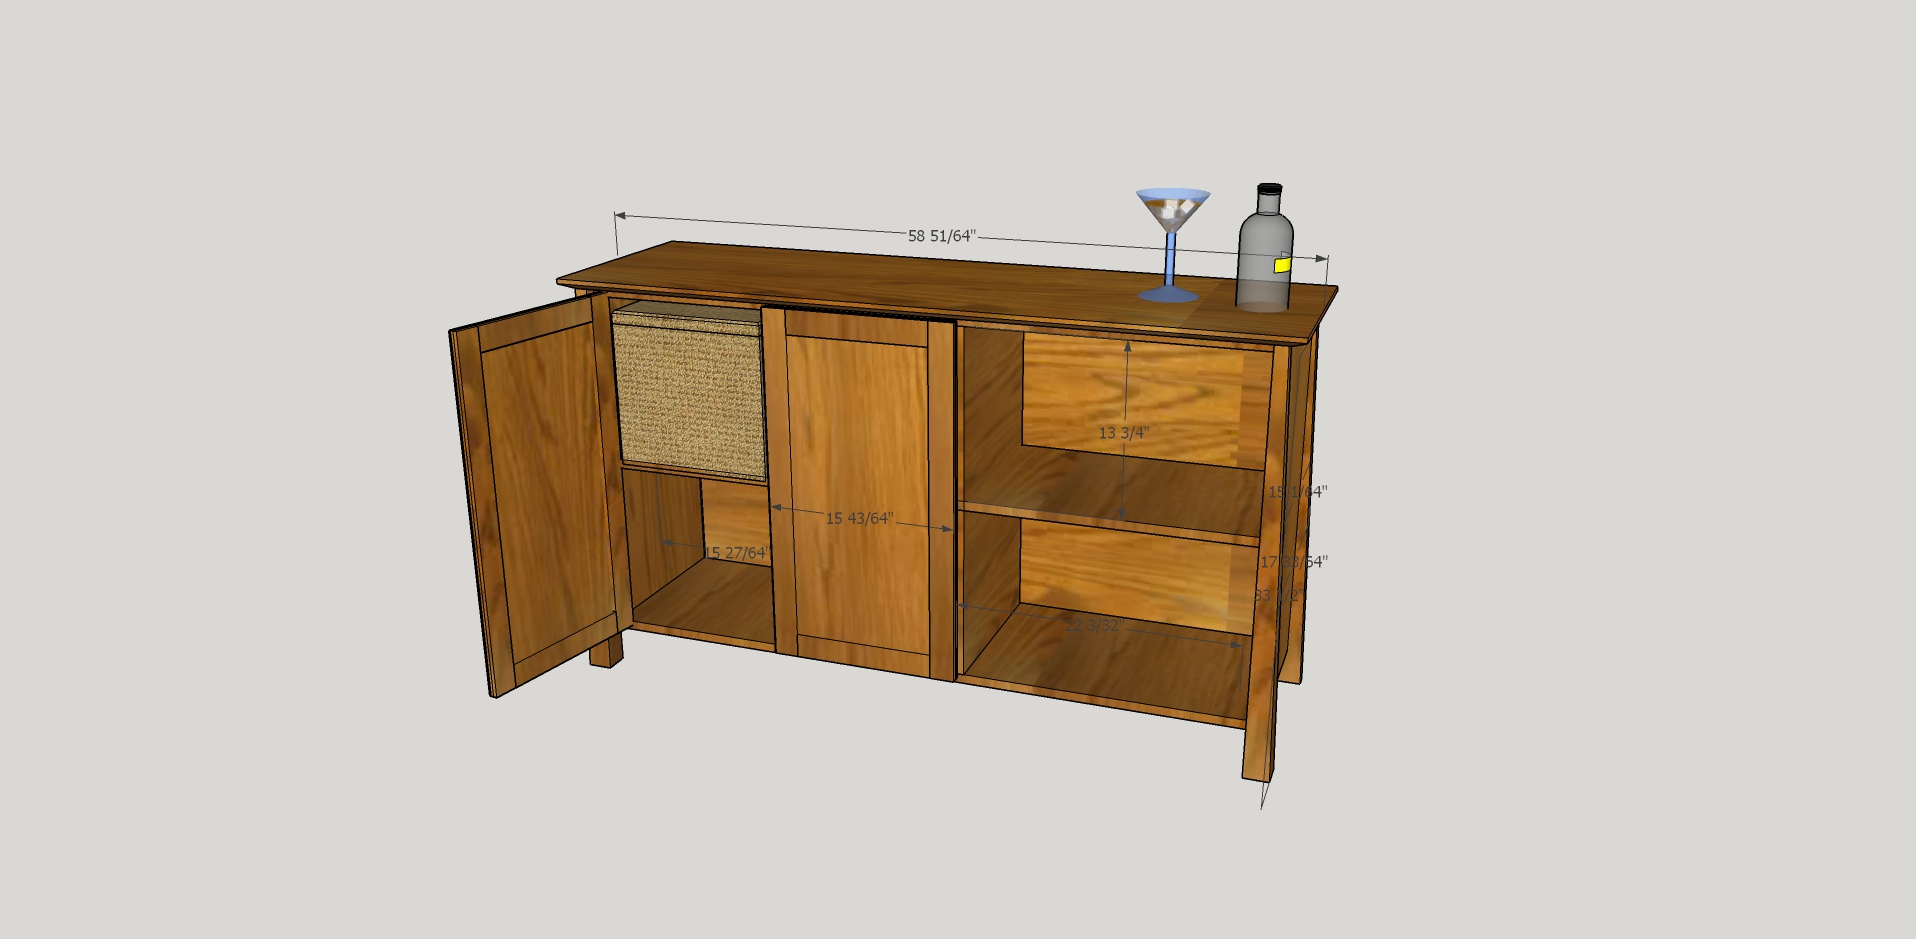 david hutch - sketchup for woodworkers